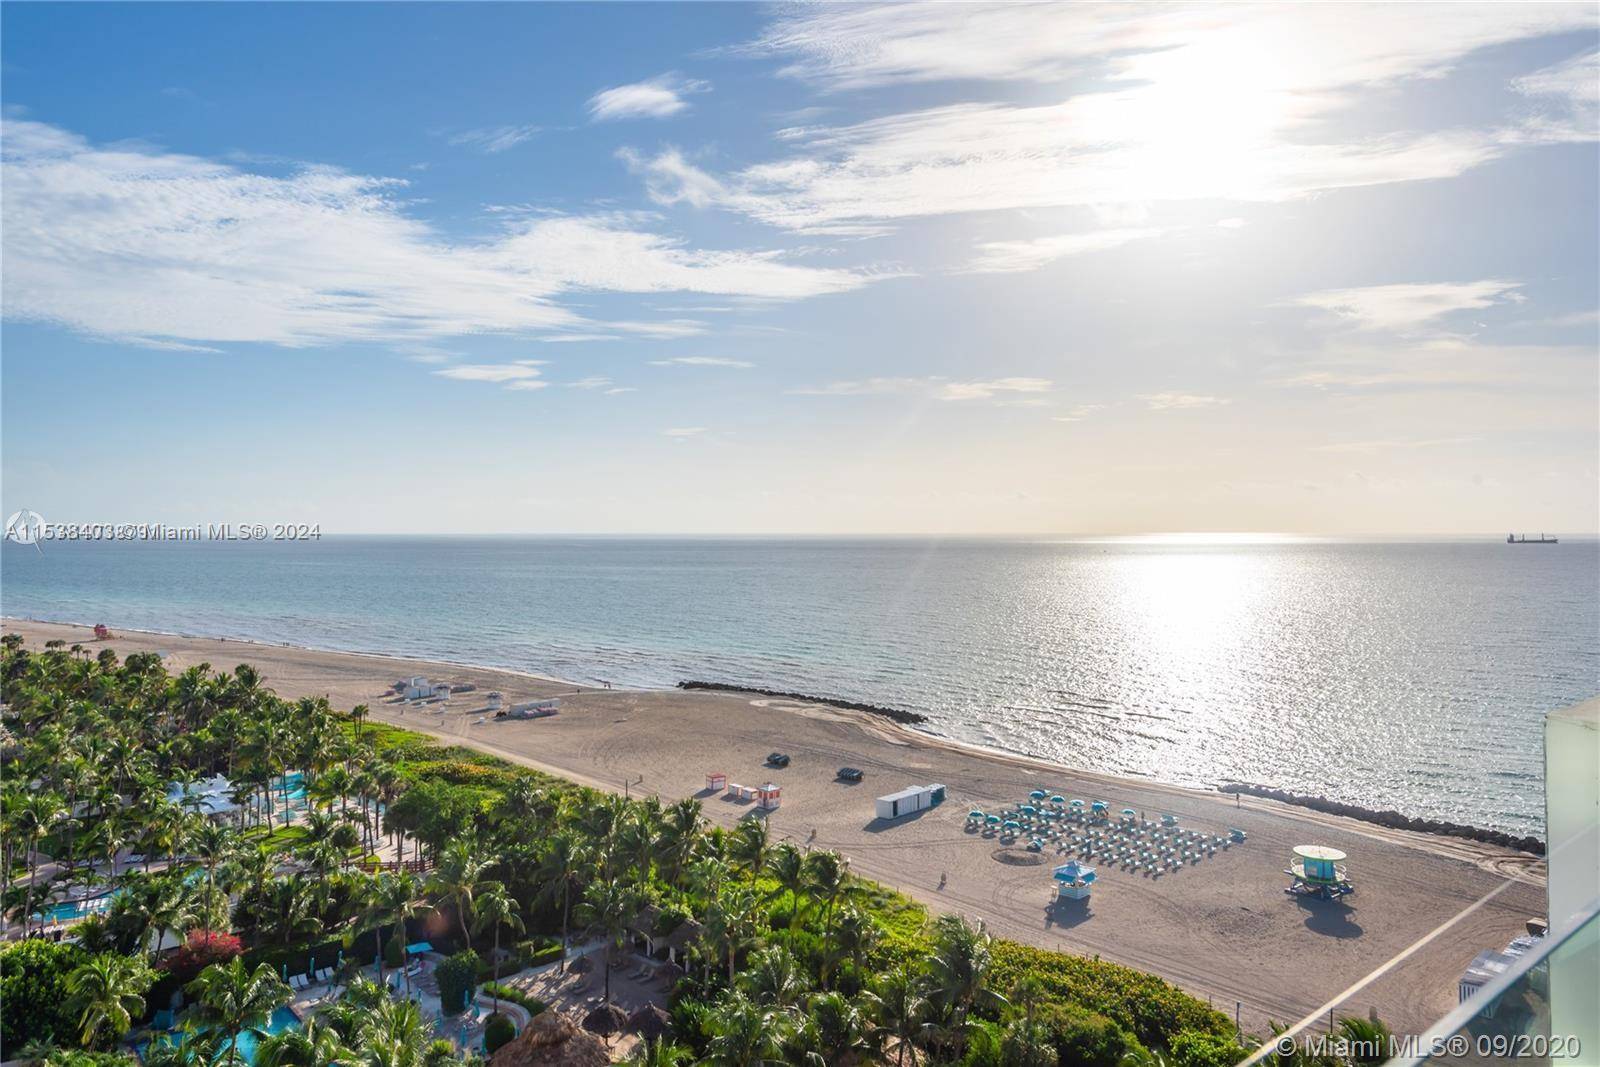 Oceanfront 1 Bed 1. 5 Bath private residence at a famous Edition hotel and residences in the heart of Miami Beach.